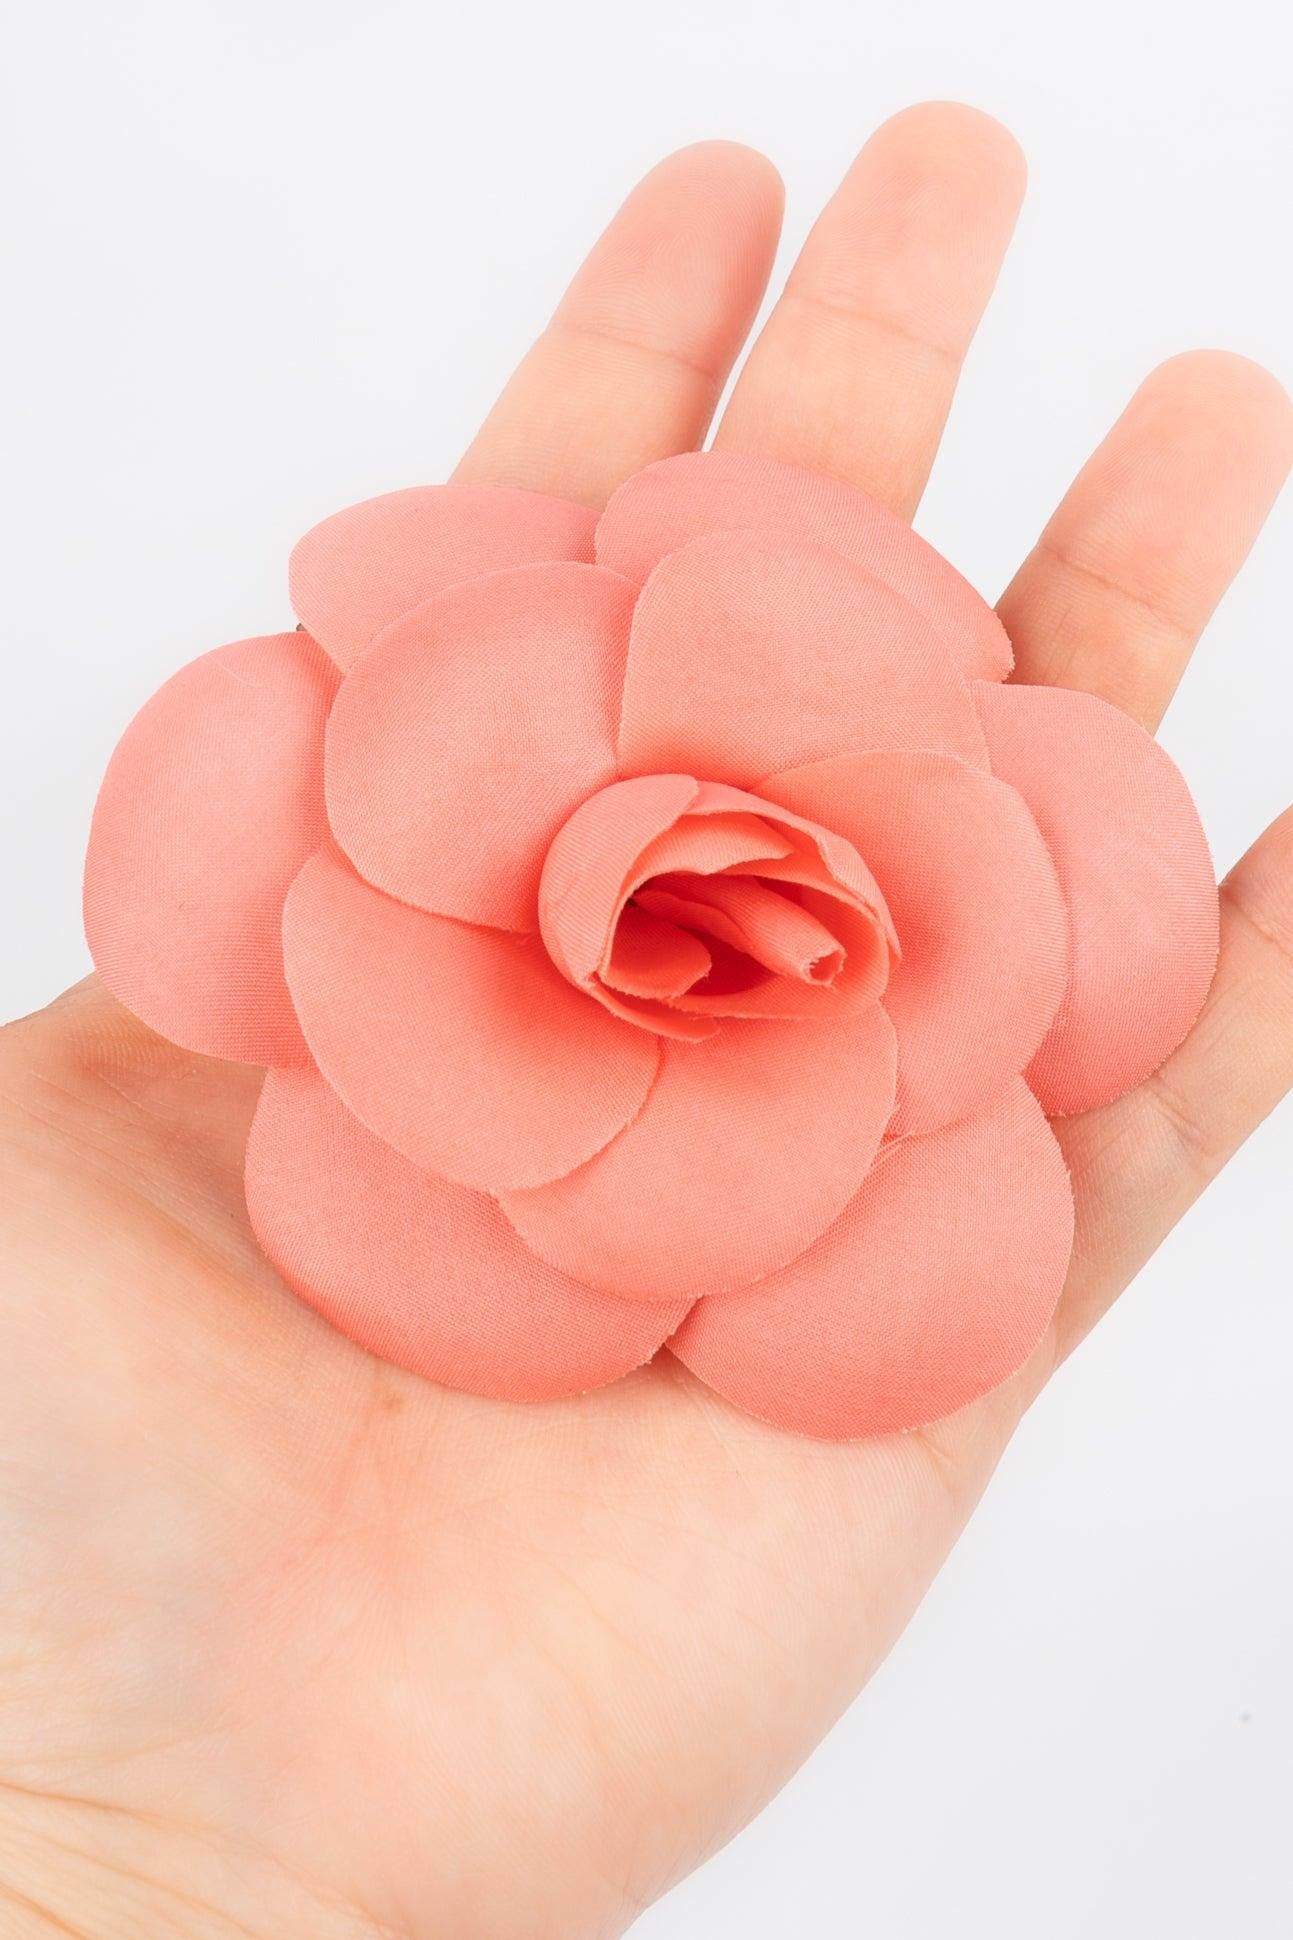 Chanel - Pink camellia brooch. Not signed jewelry.
 
 Additional information: 
 Condition: Good condition
 Dimensions: Daimeter: 7.5 cm
 
 Seller Reference: BRB145